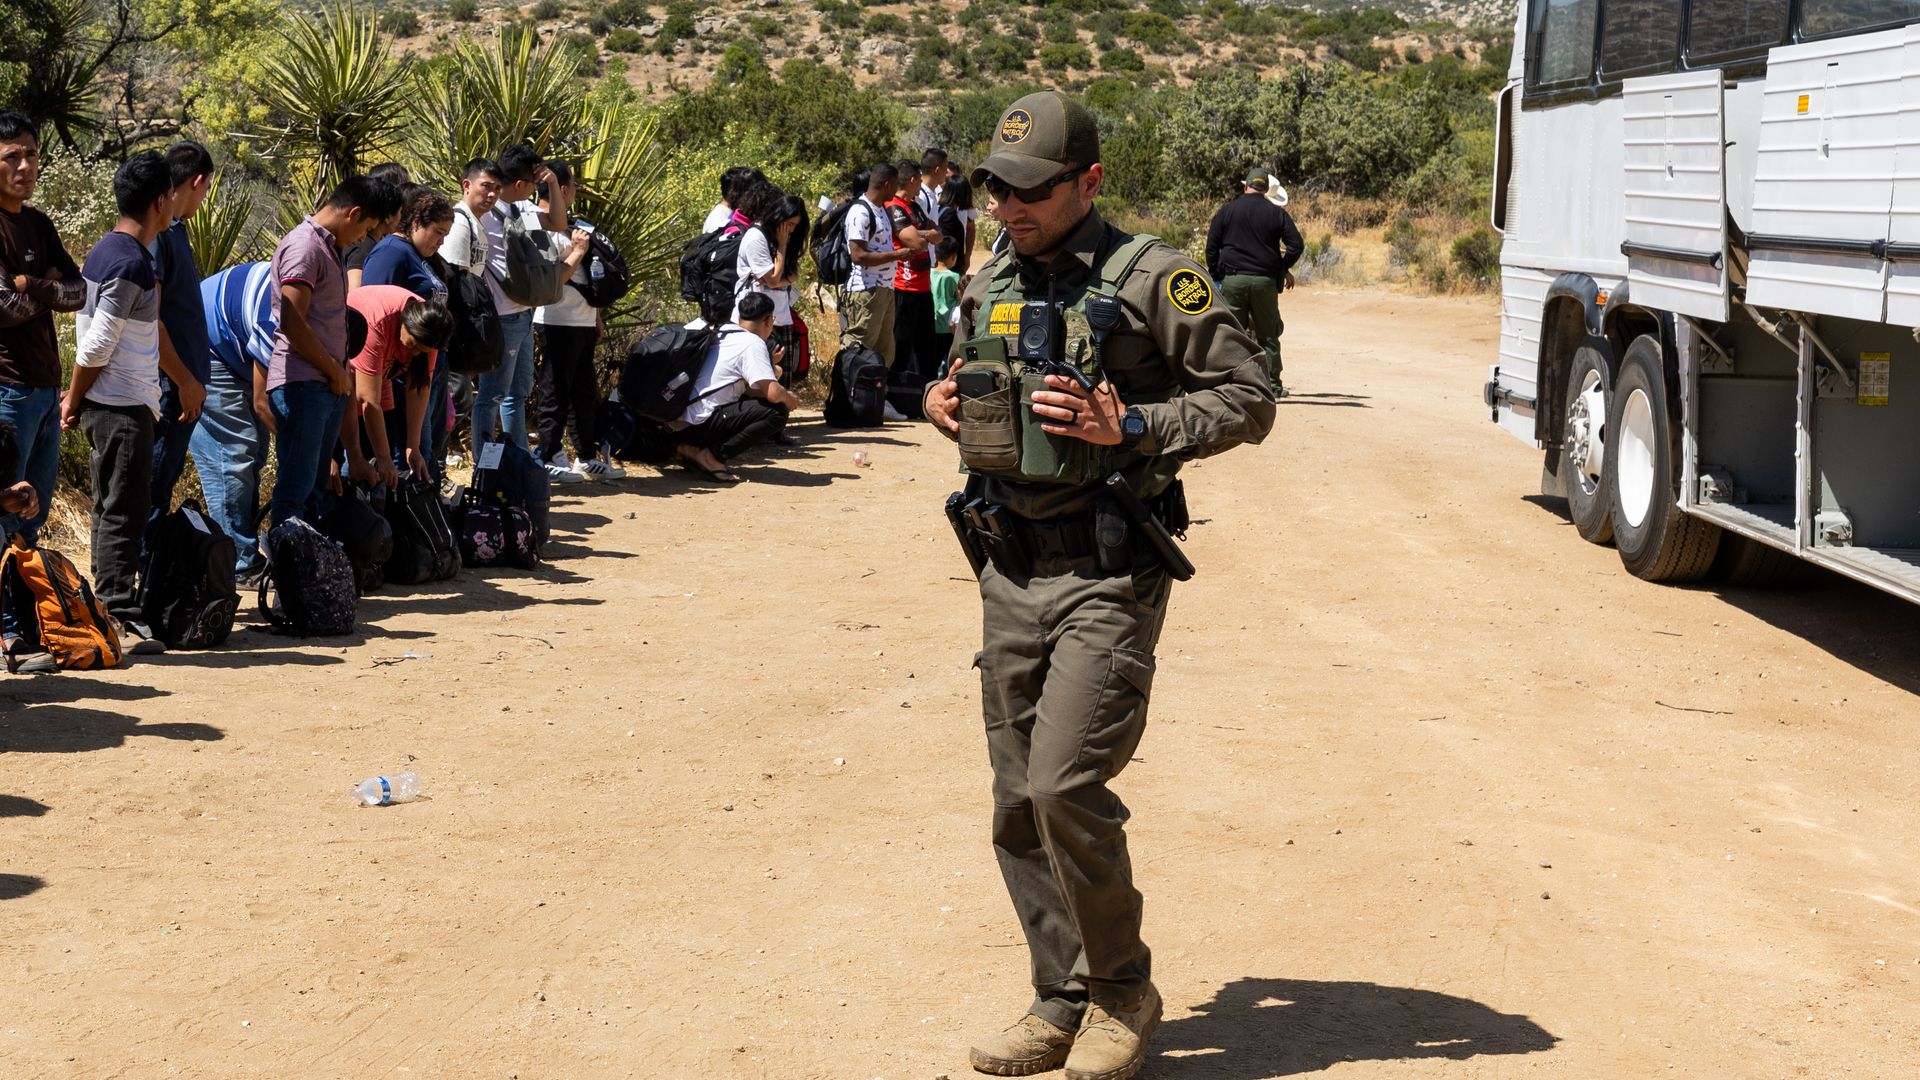 Customs and Border Protection said it encountered 170,000 people in May, including 117,000 who crossed between ports of entry.